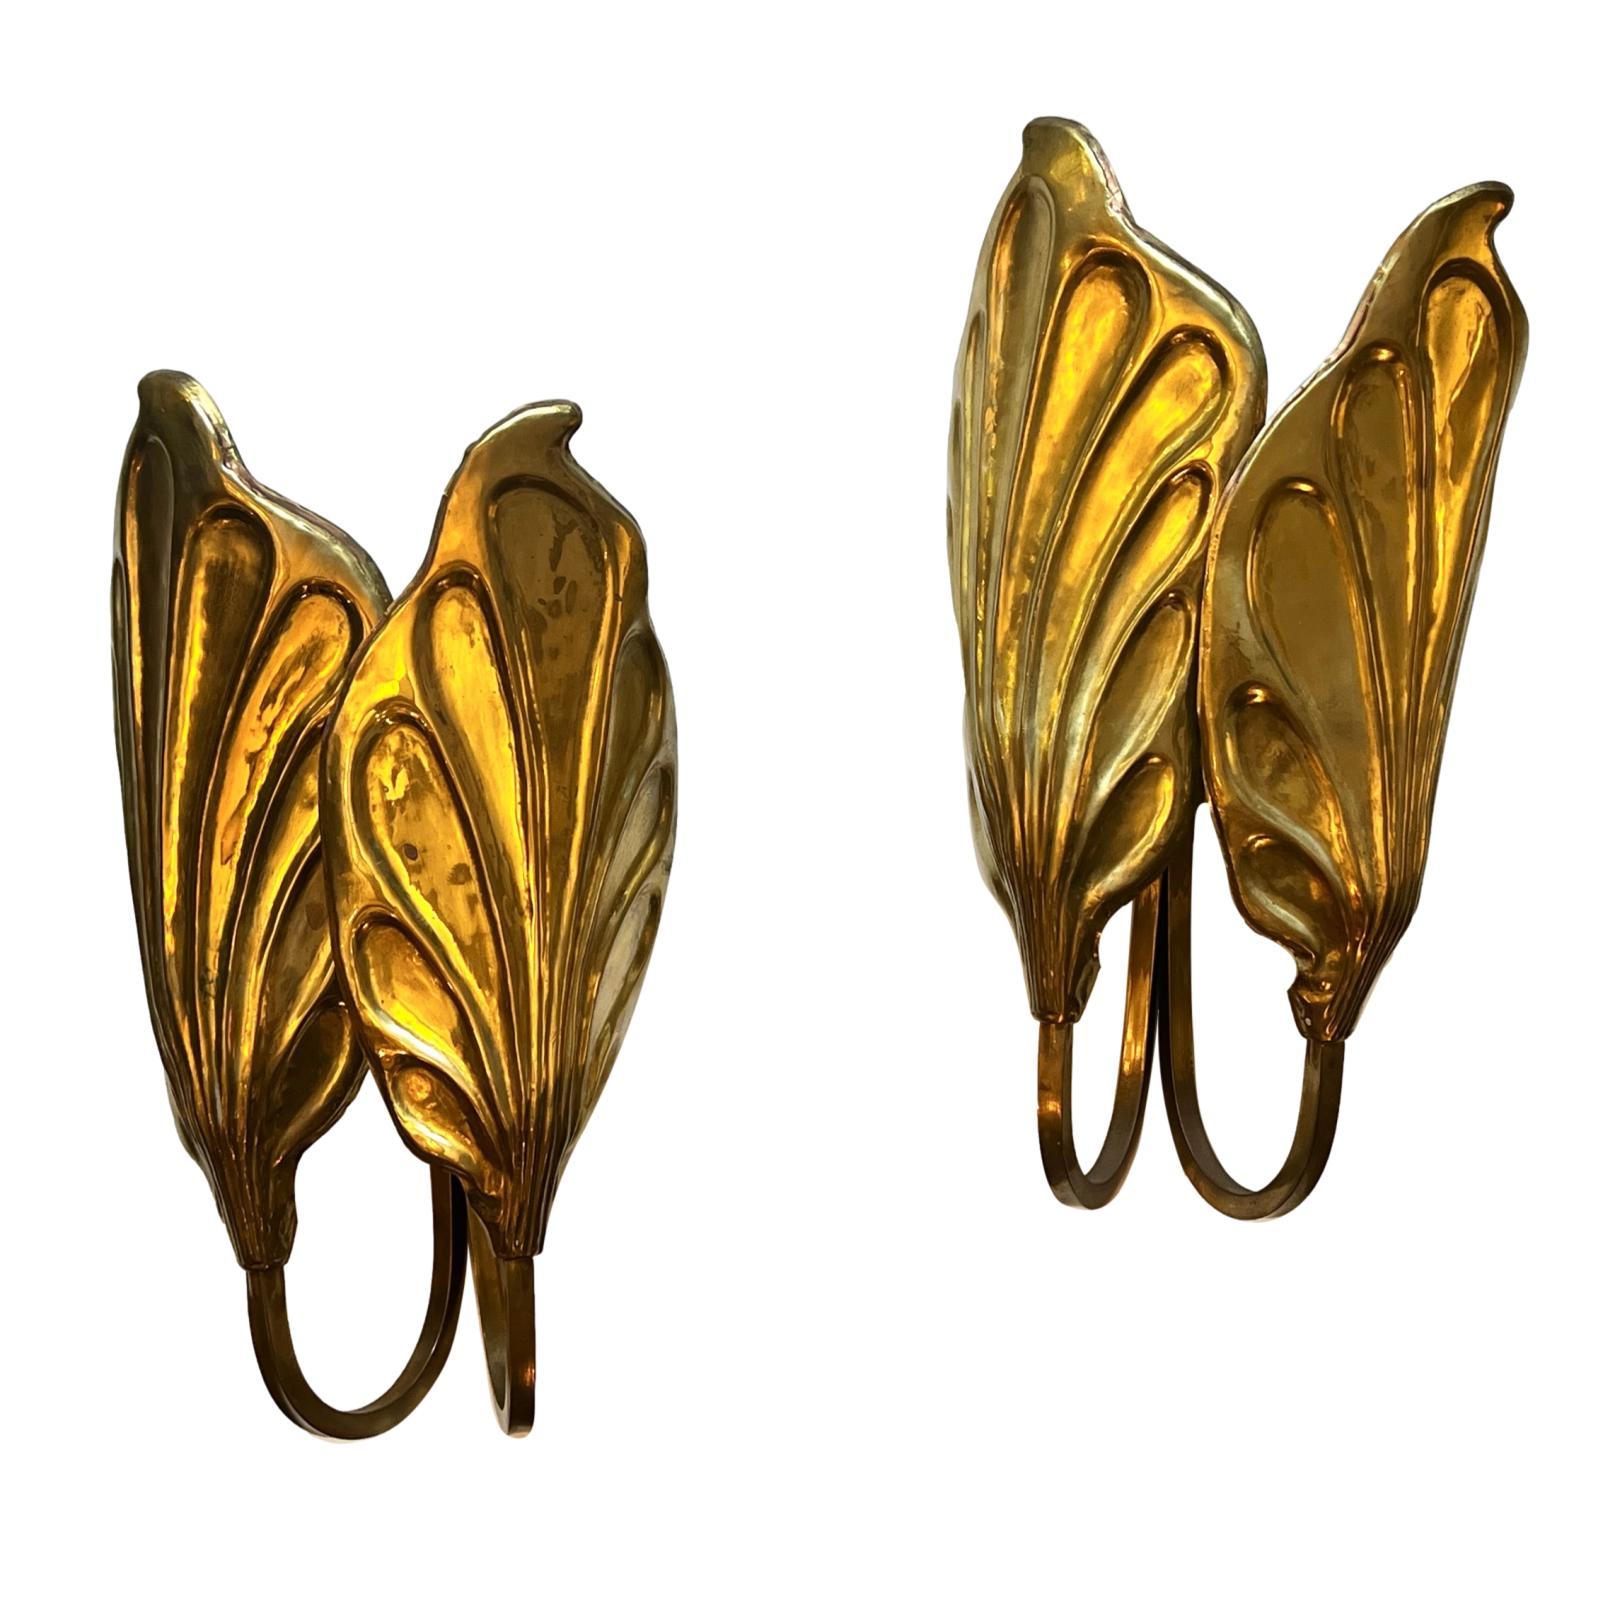 Set of eight circa 1960's Italian hammered and polished bronze leaf motif art nouveau style double light sconces. Sold per pair.

Measurements:
Height: 15.5